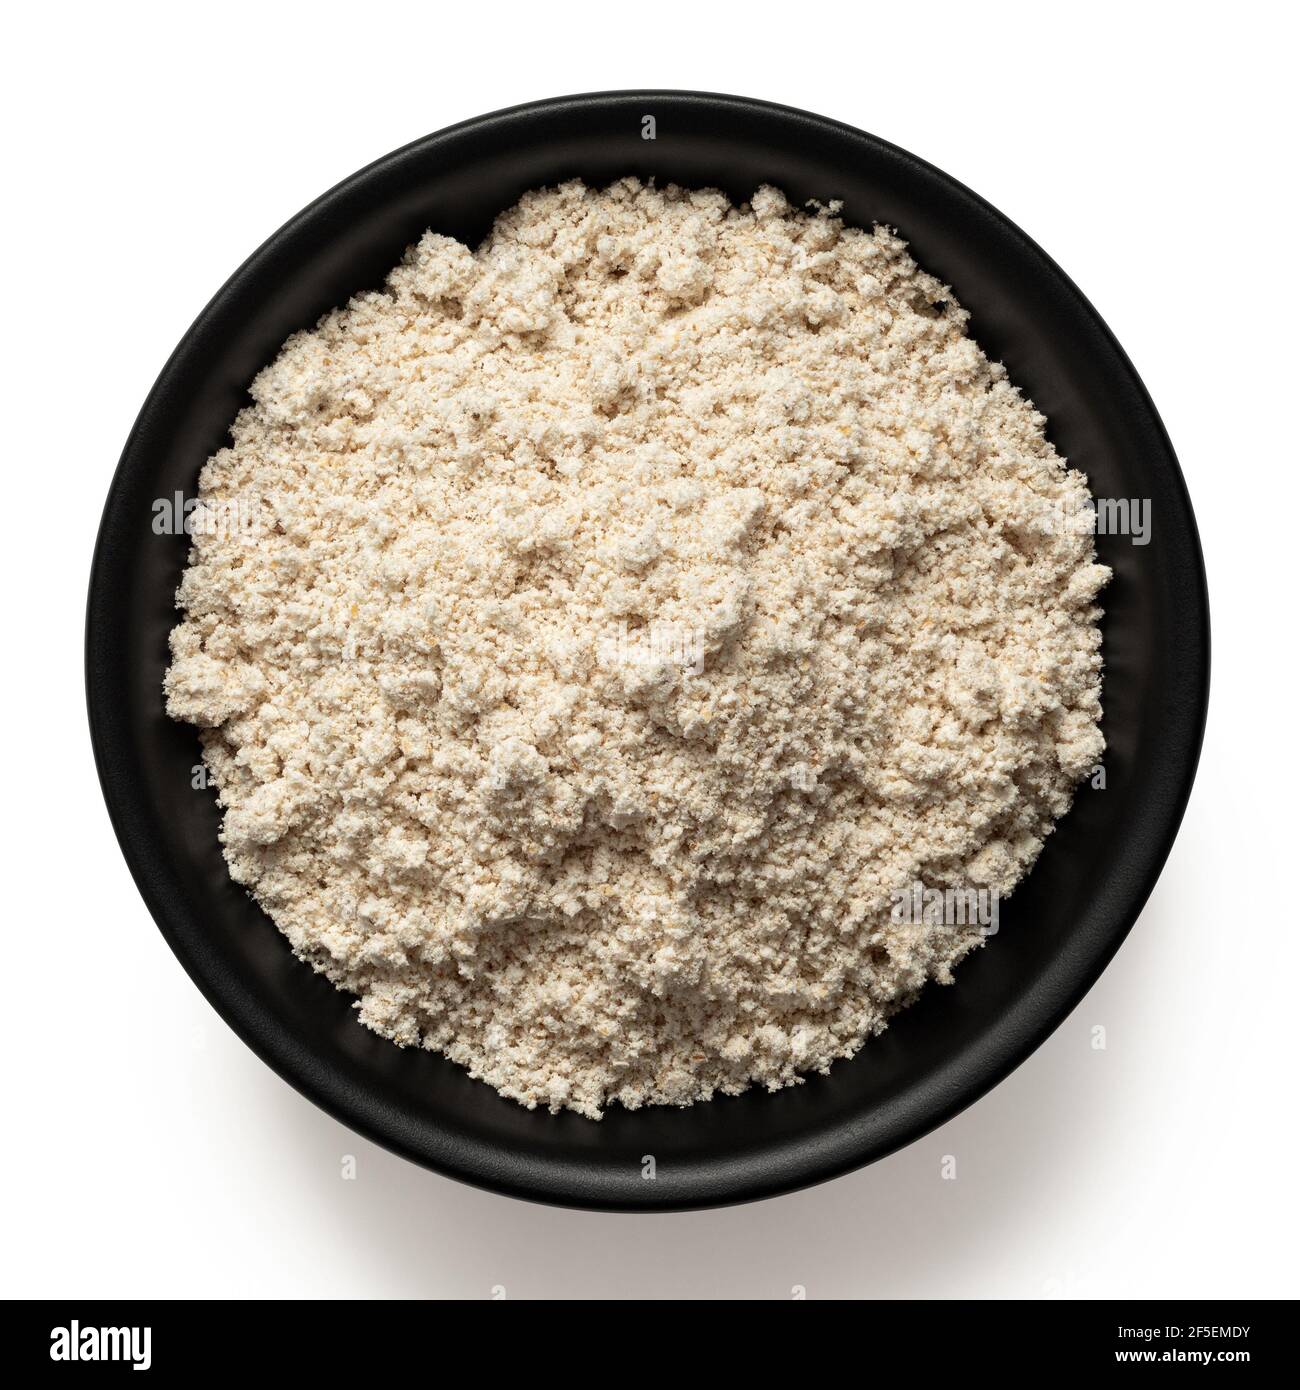 Oat flour in a black ceramic bowl isolated on white. Top view. Stock Photo